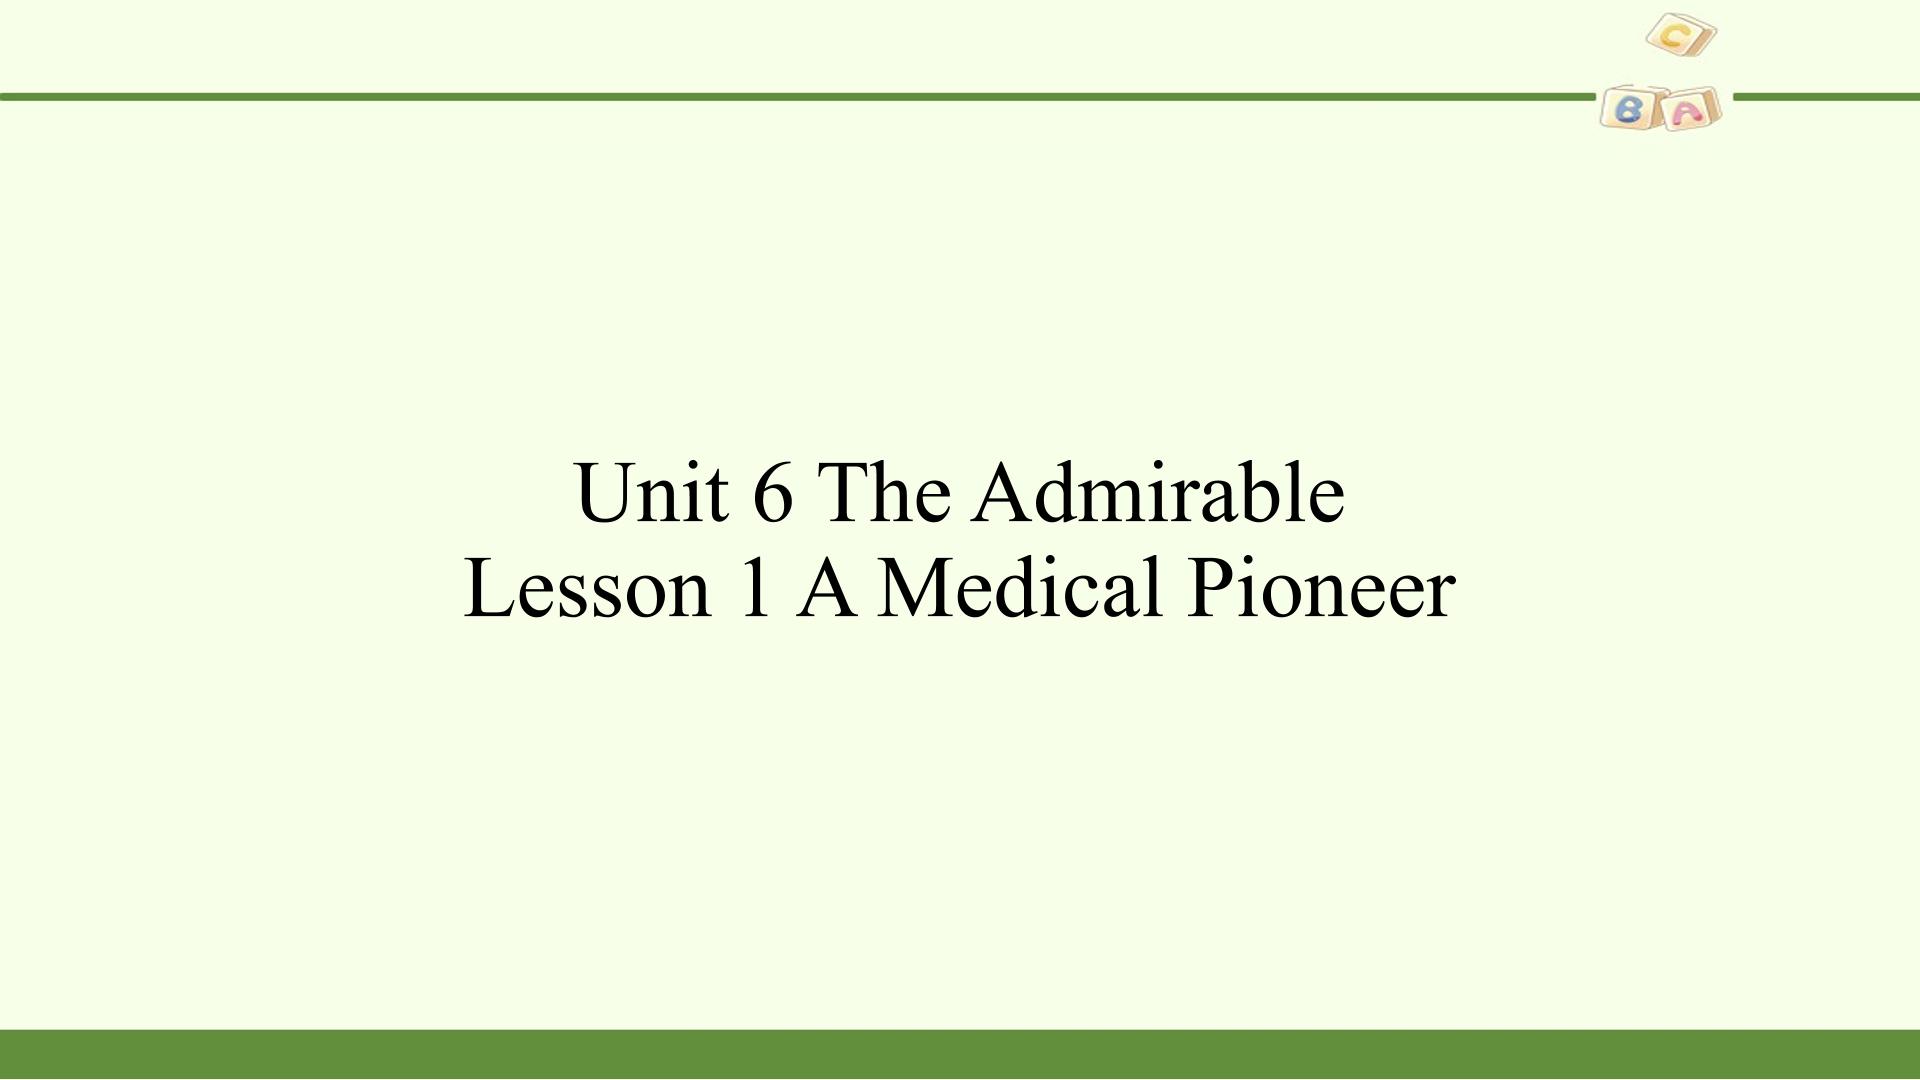 Lesson 1 A Medical Pioneer